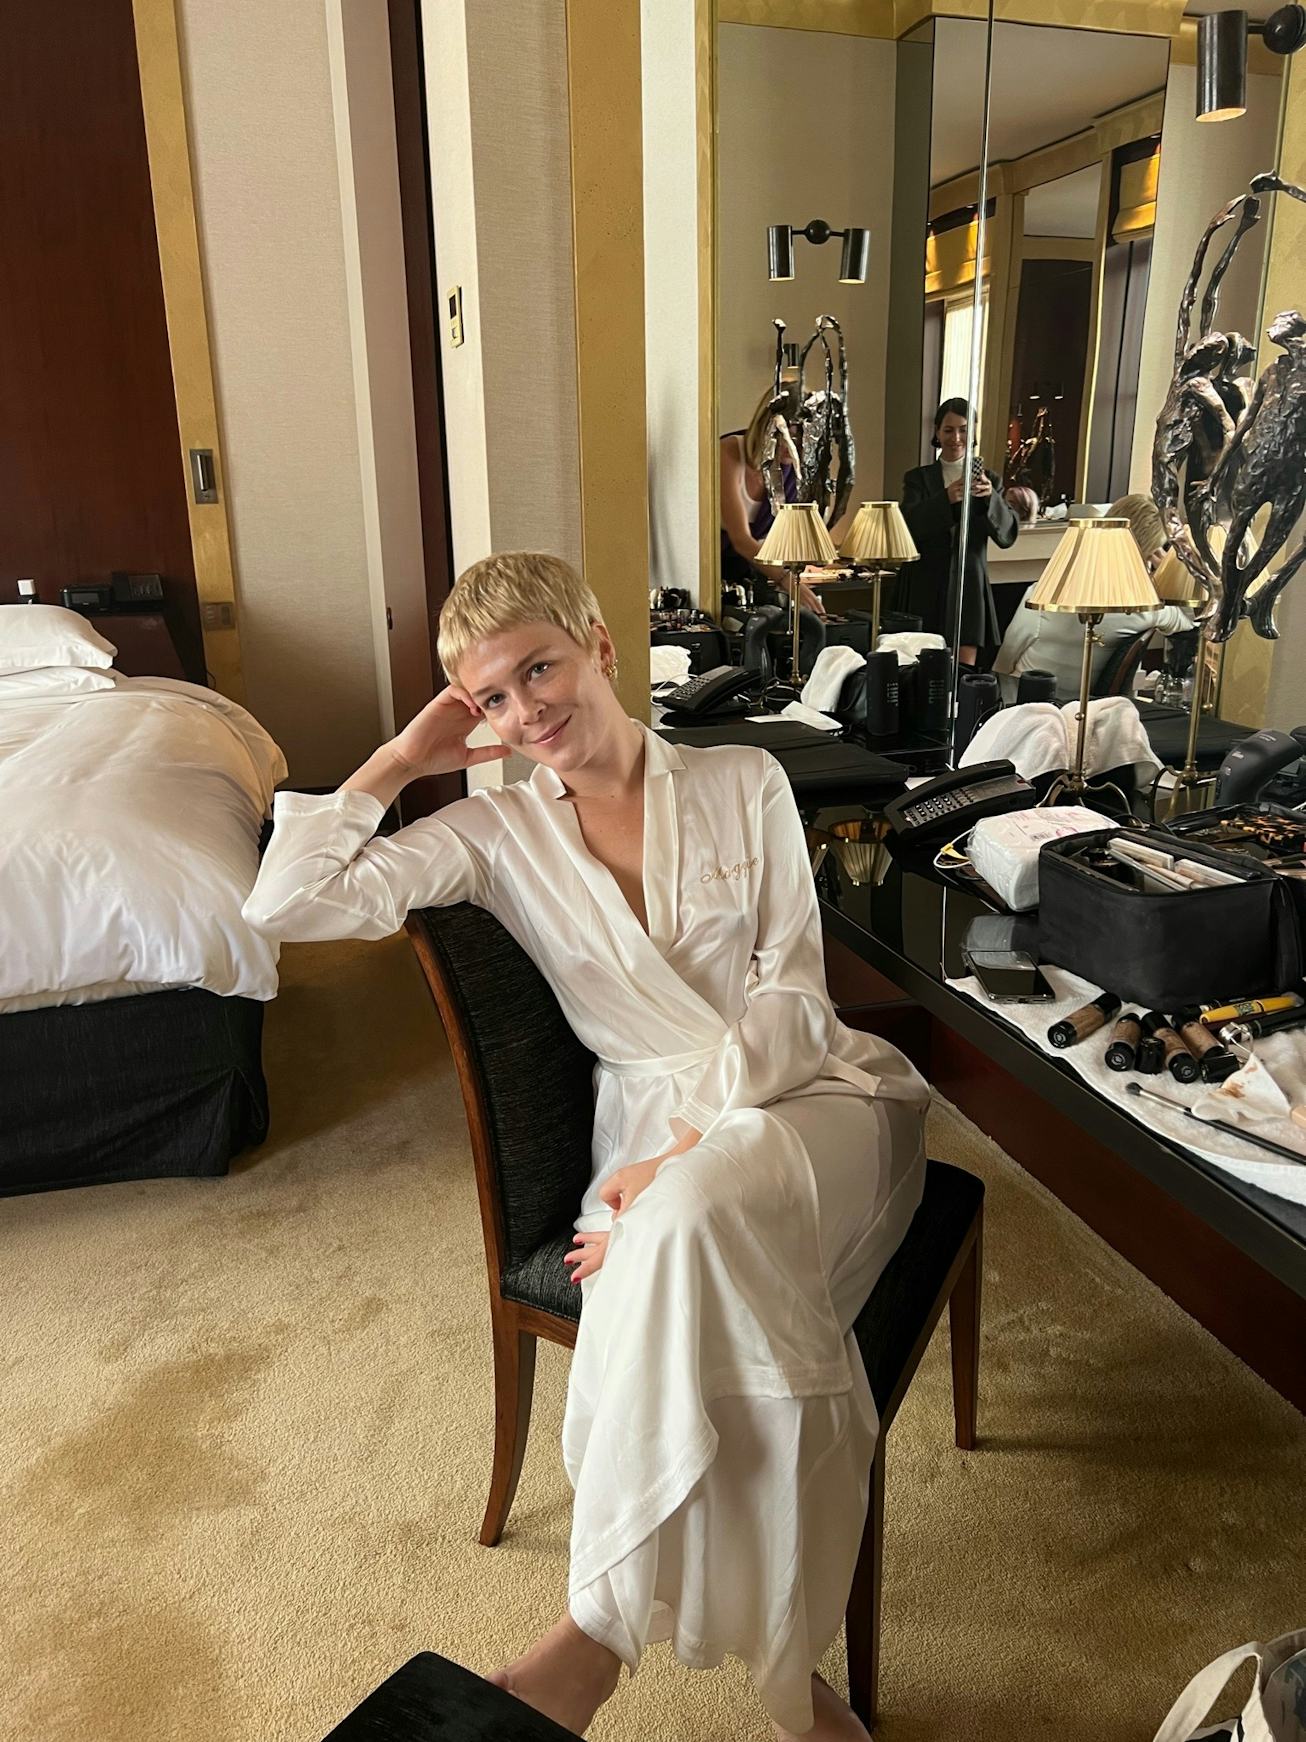 American singer Maggie Rogers with blonde hair, wearing a white dress, getting ready for Louis Vuitt...